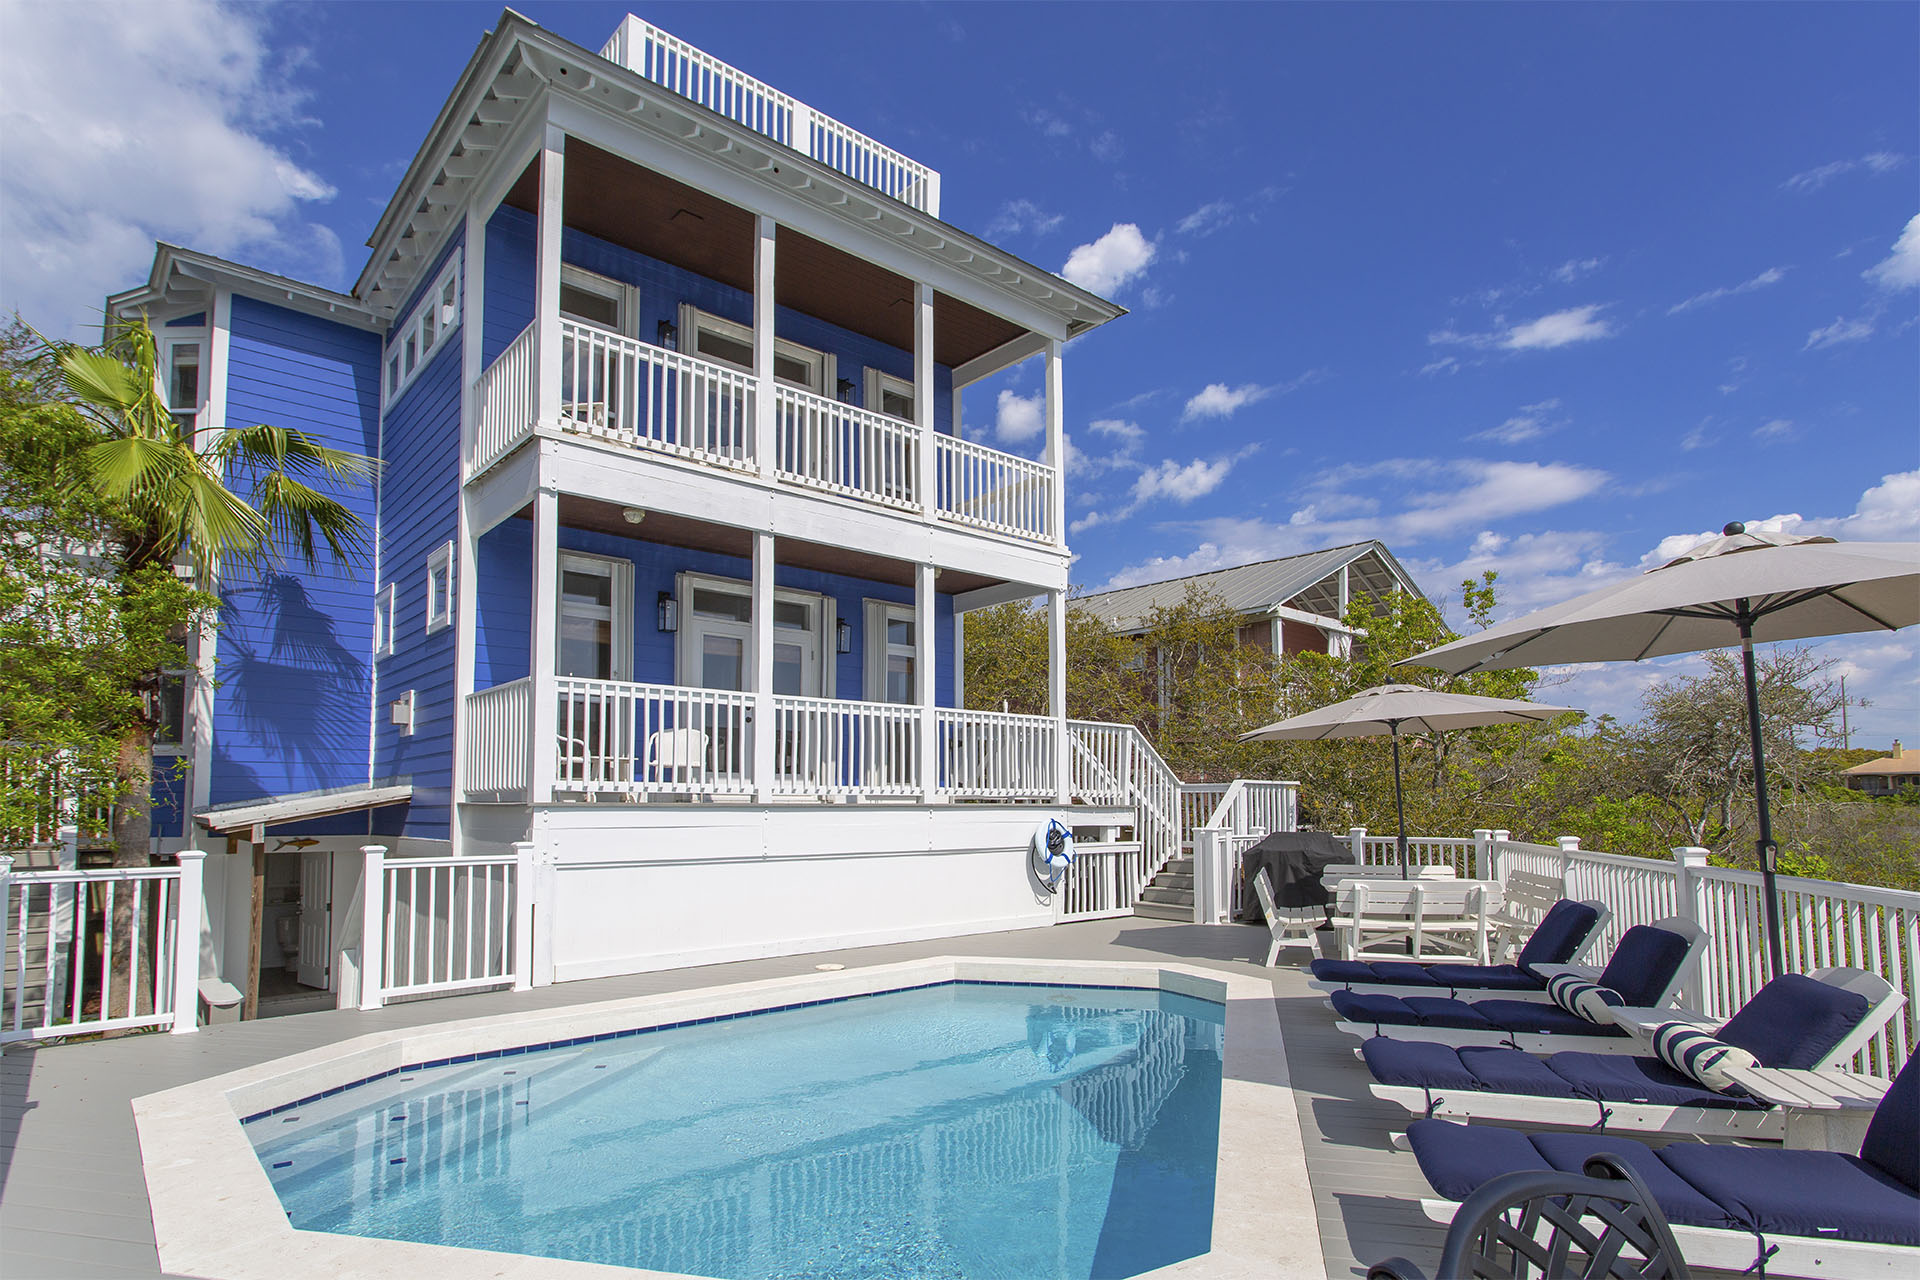 Destin2BHere Vacation Home with Pool